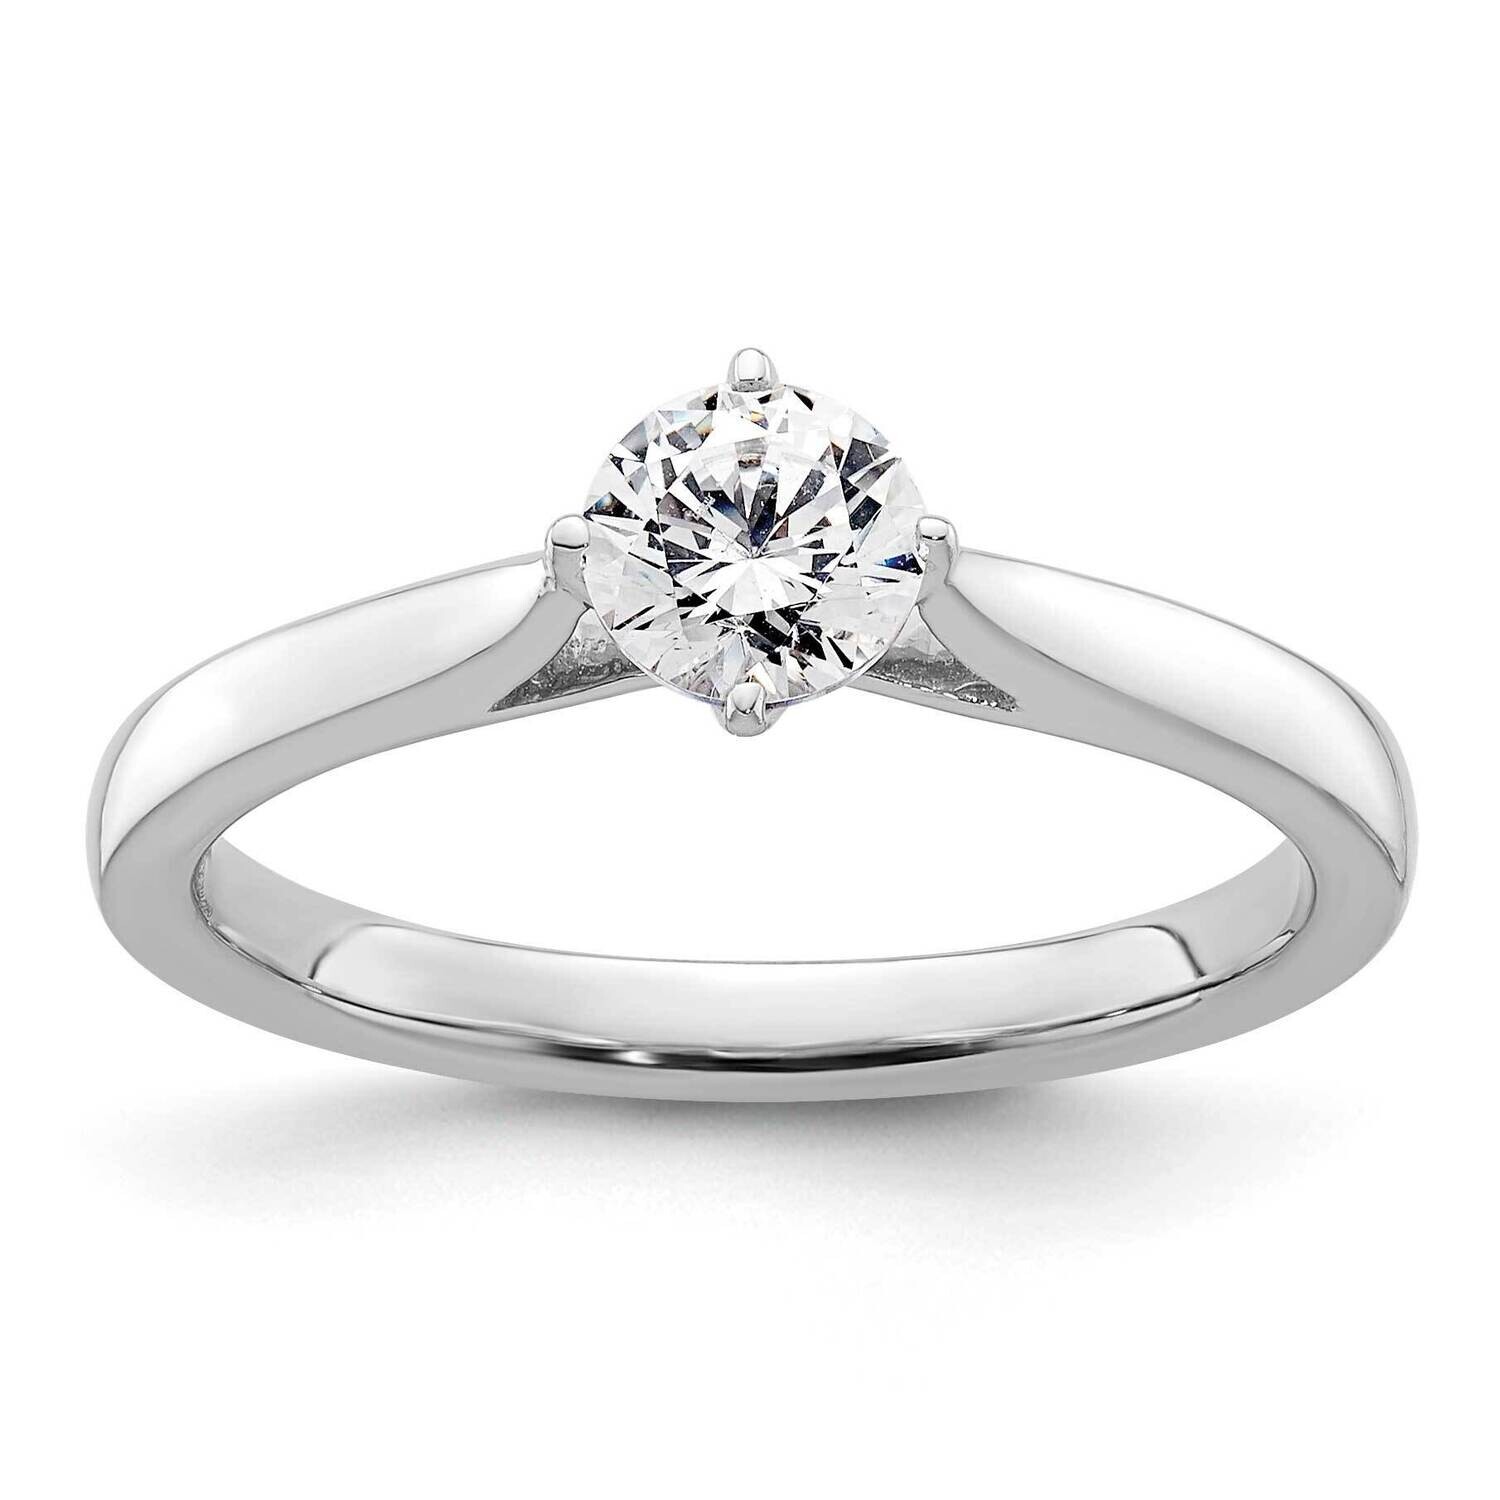 1/2 Carat 5.20 mm 4-Prong Round Solitaire Engagement Ring Mounting 14k White Gold RM1938E-050-CWAA